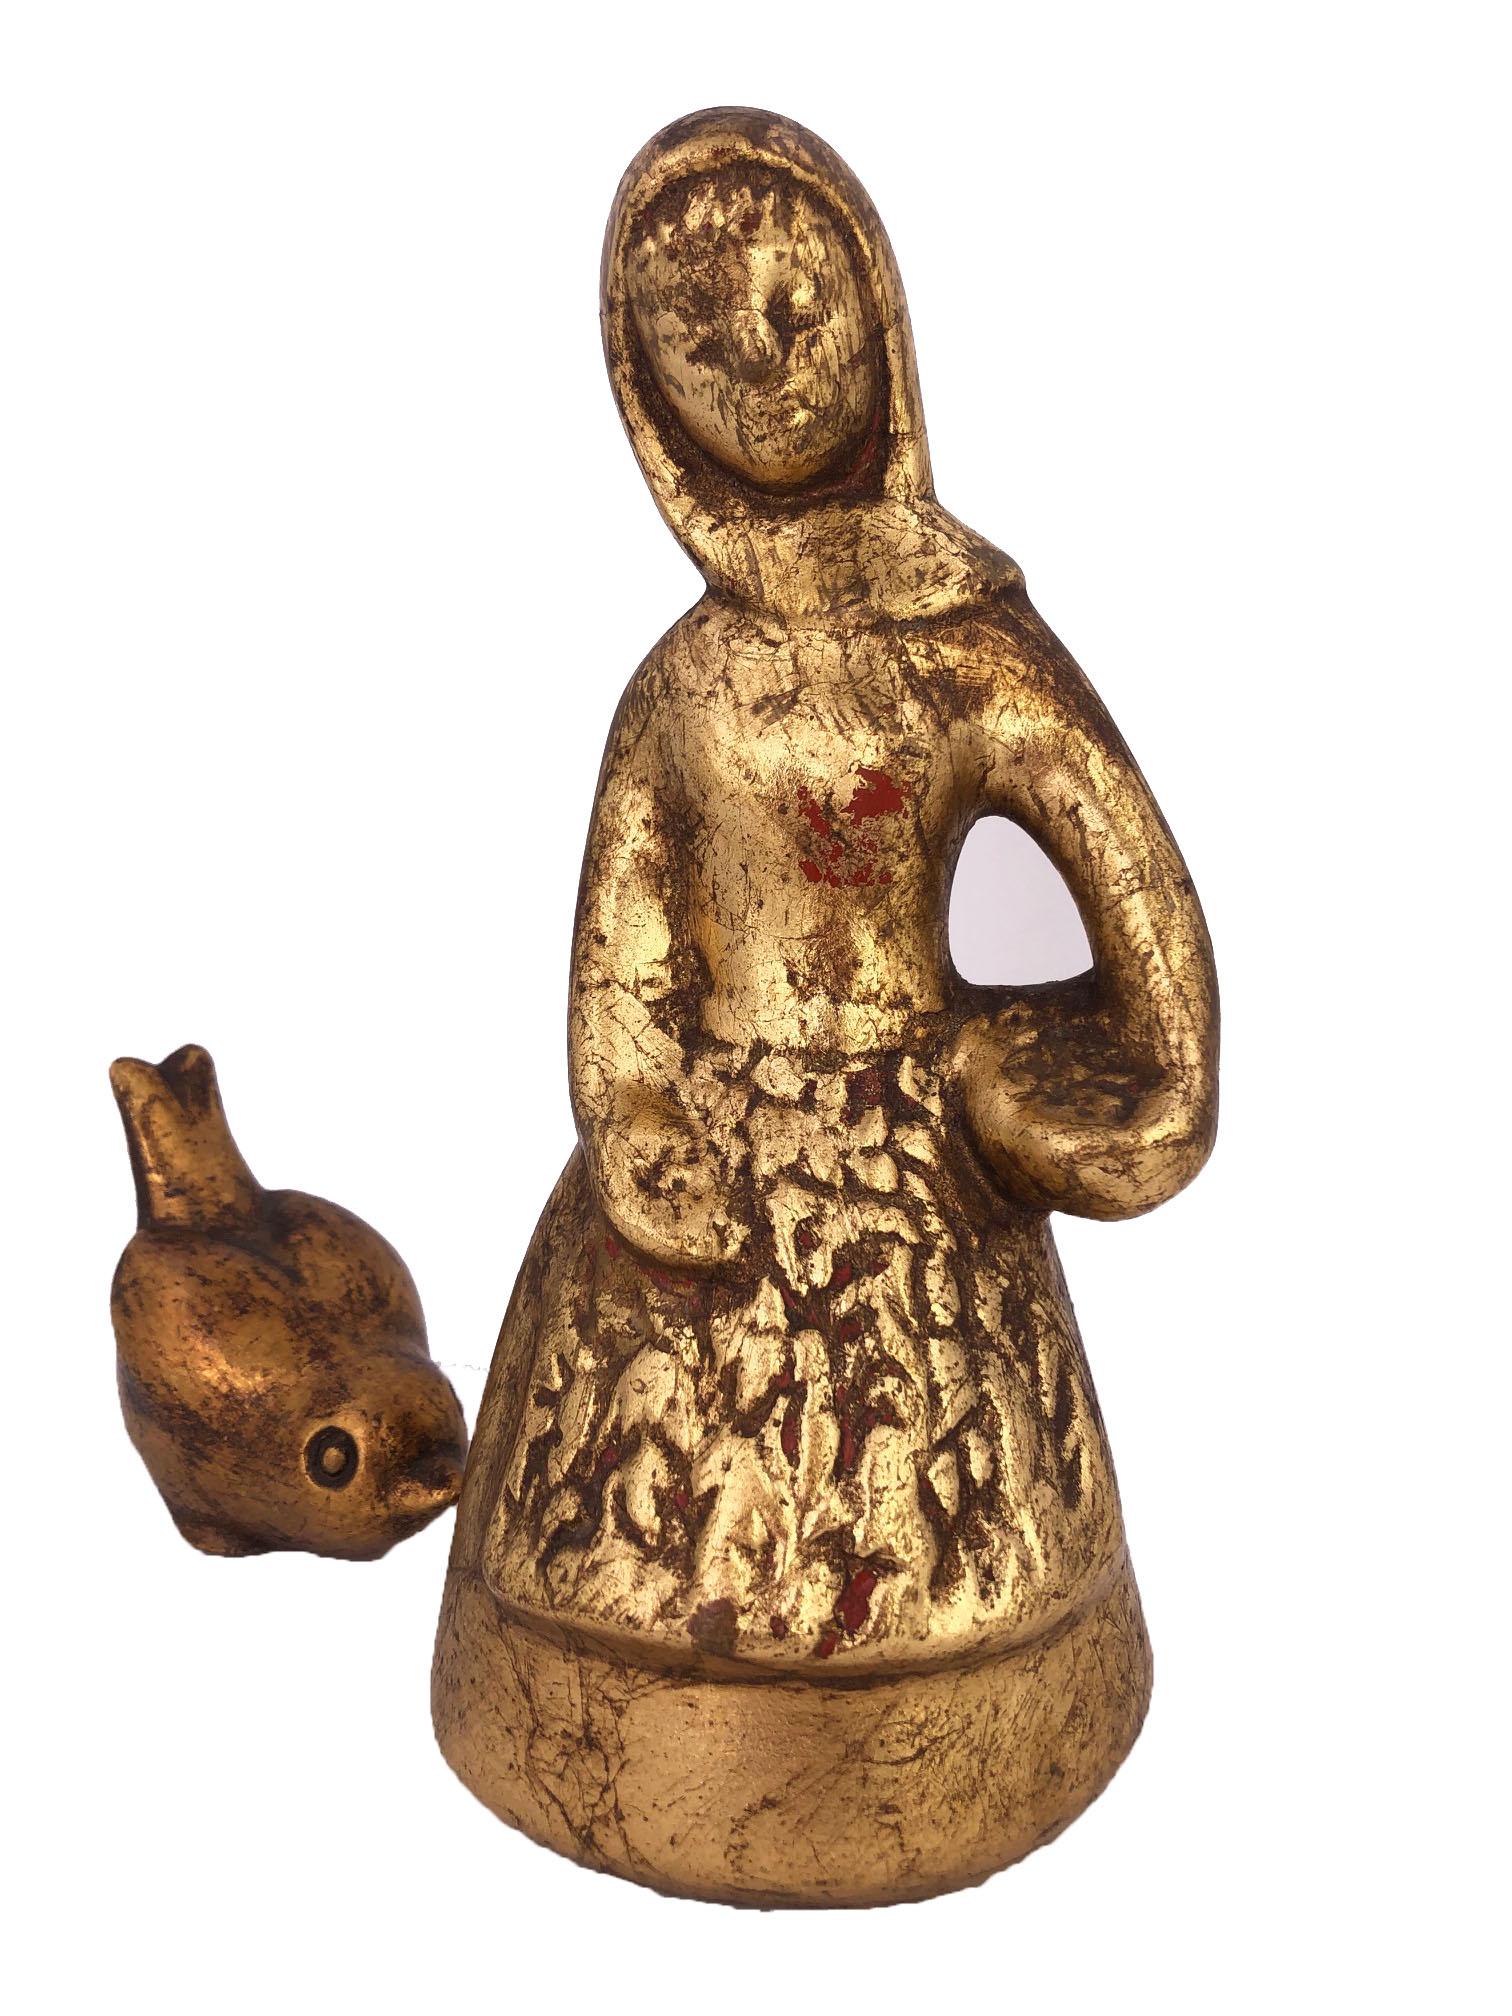 Girl and Bird Ceramic Sculpture by artist Howard Pierce, gold color, red 